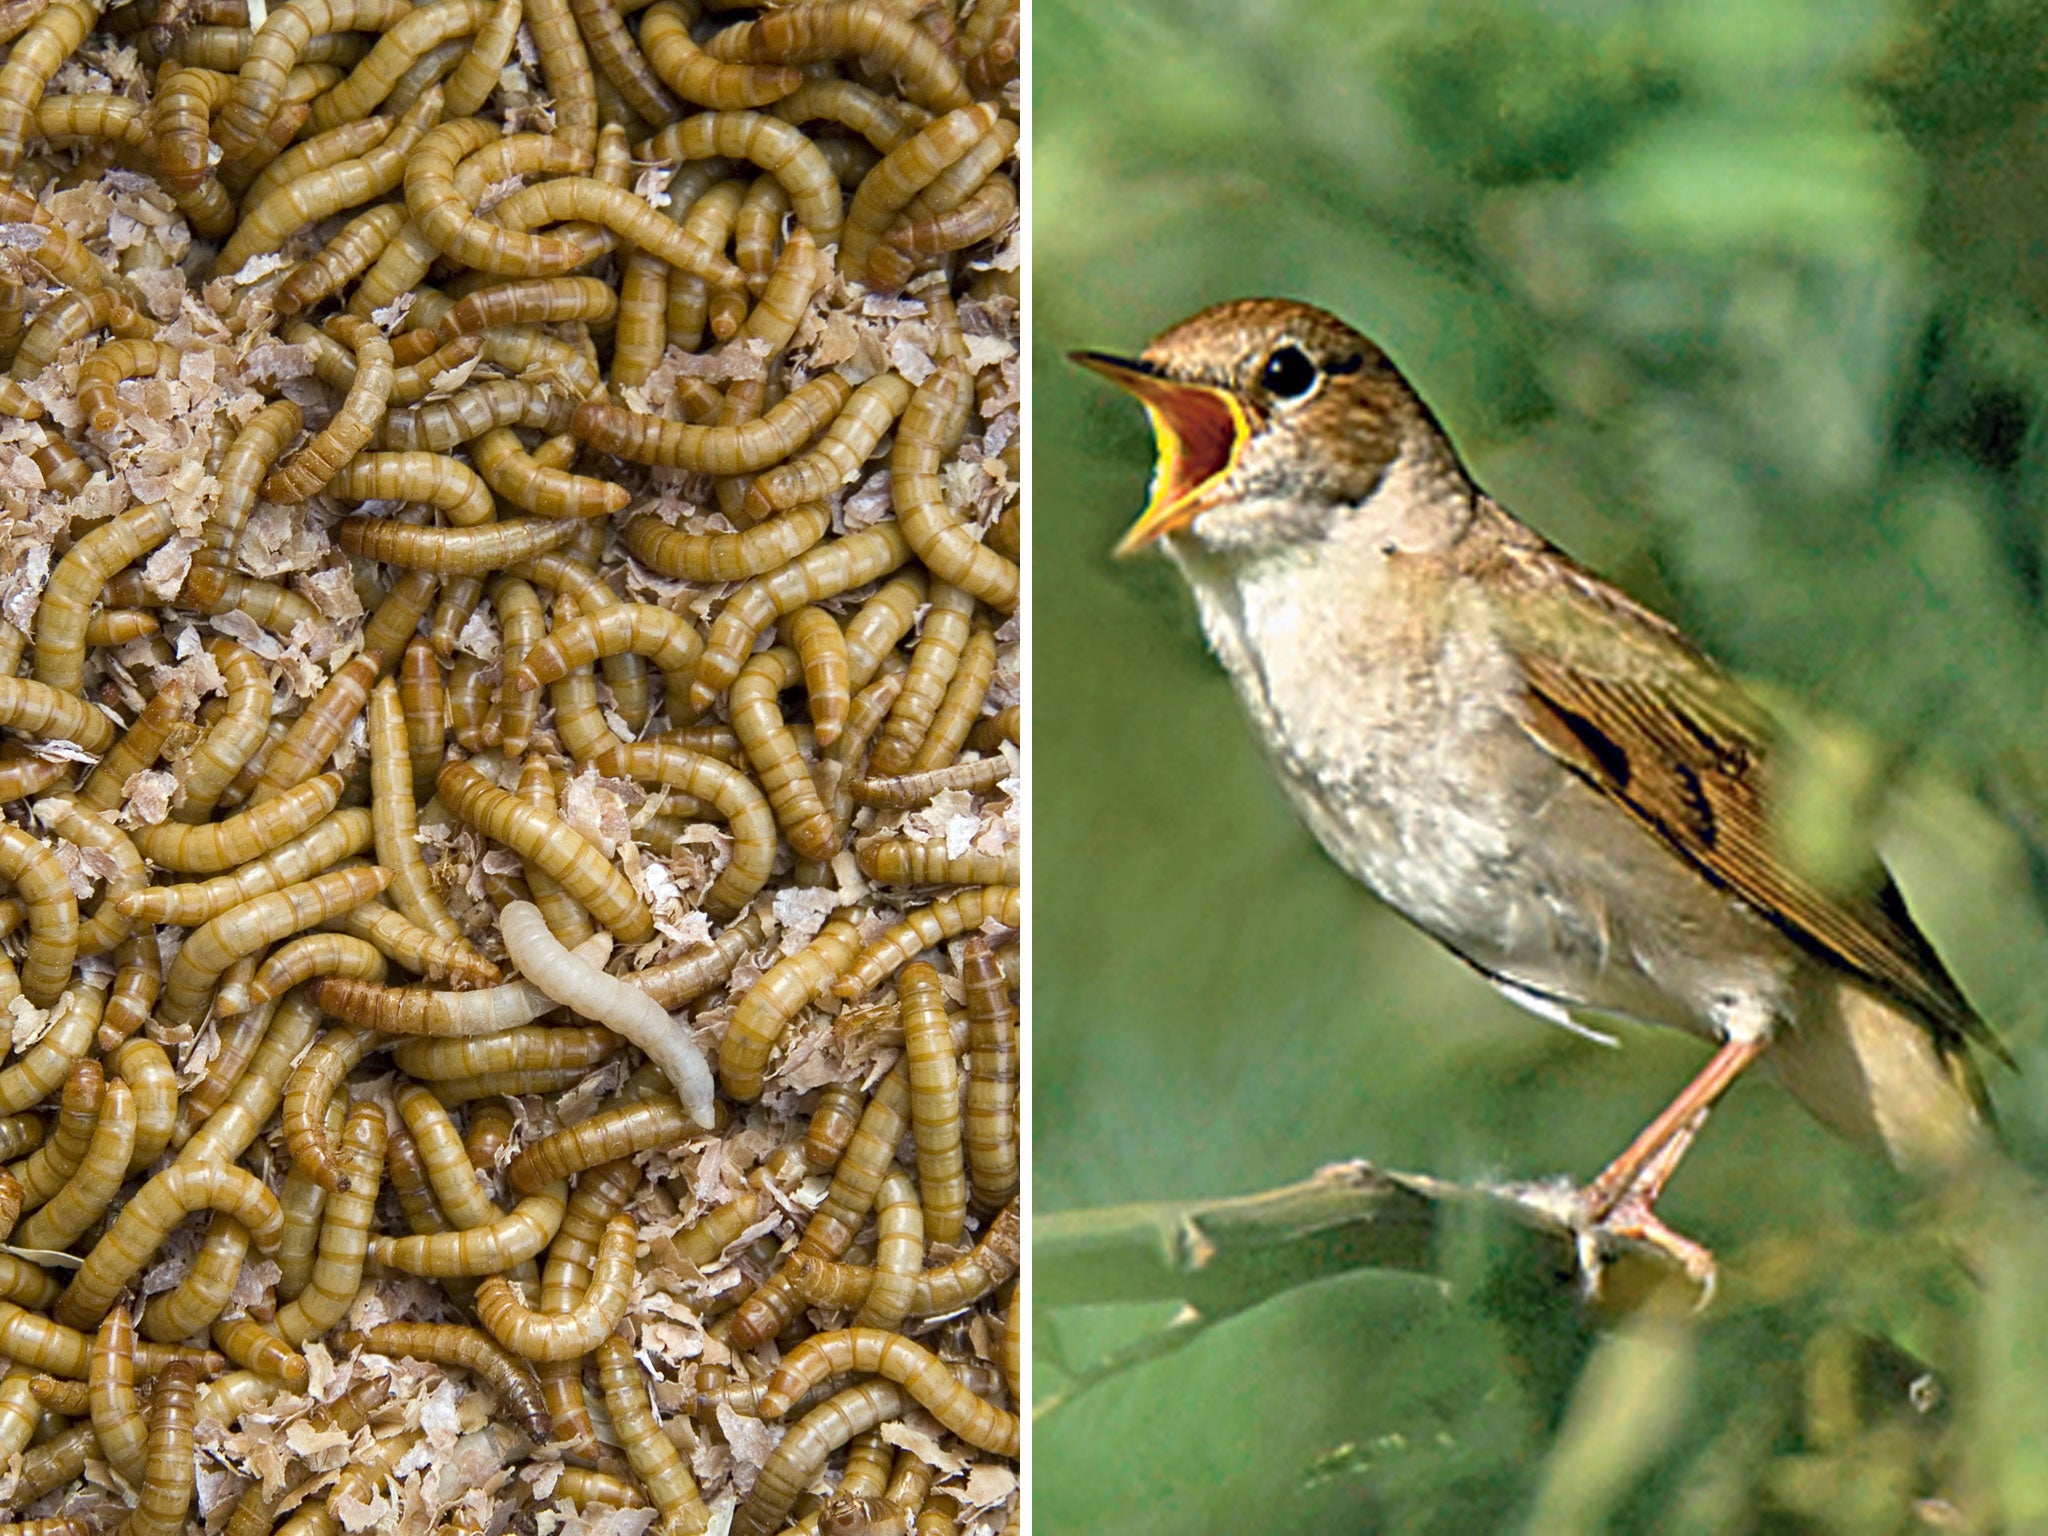 During the wintry weather the natural sources of food change for birds